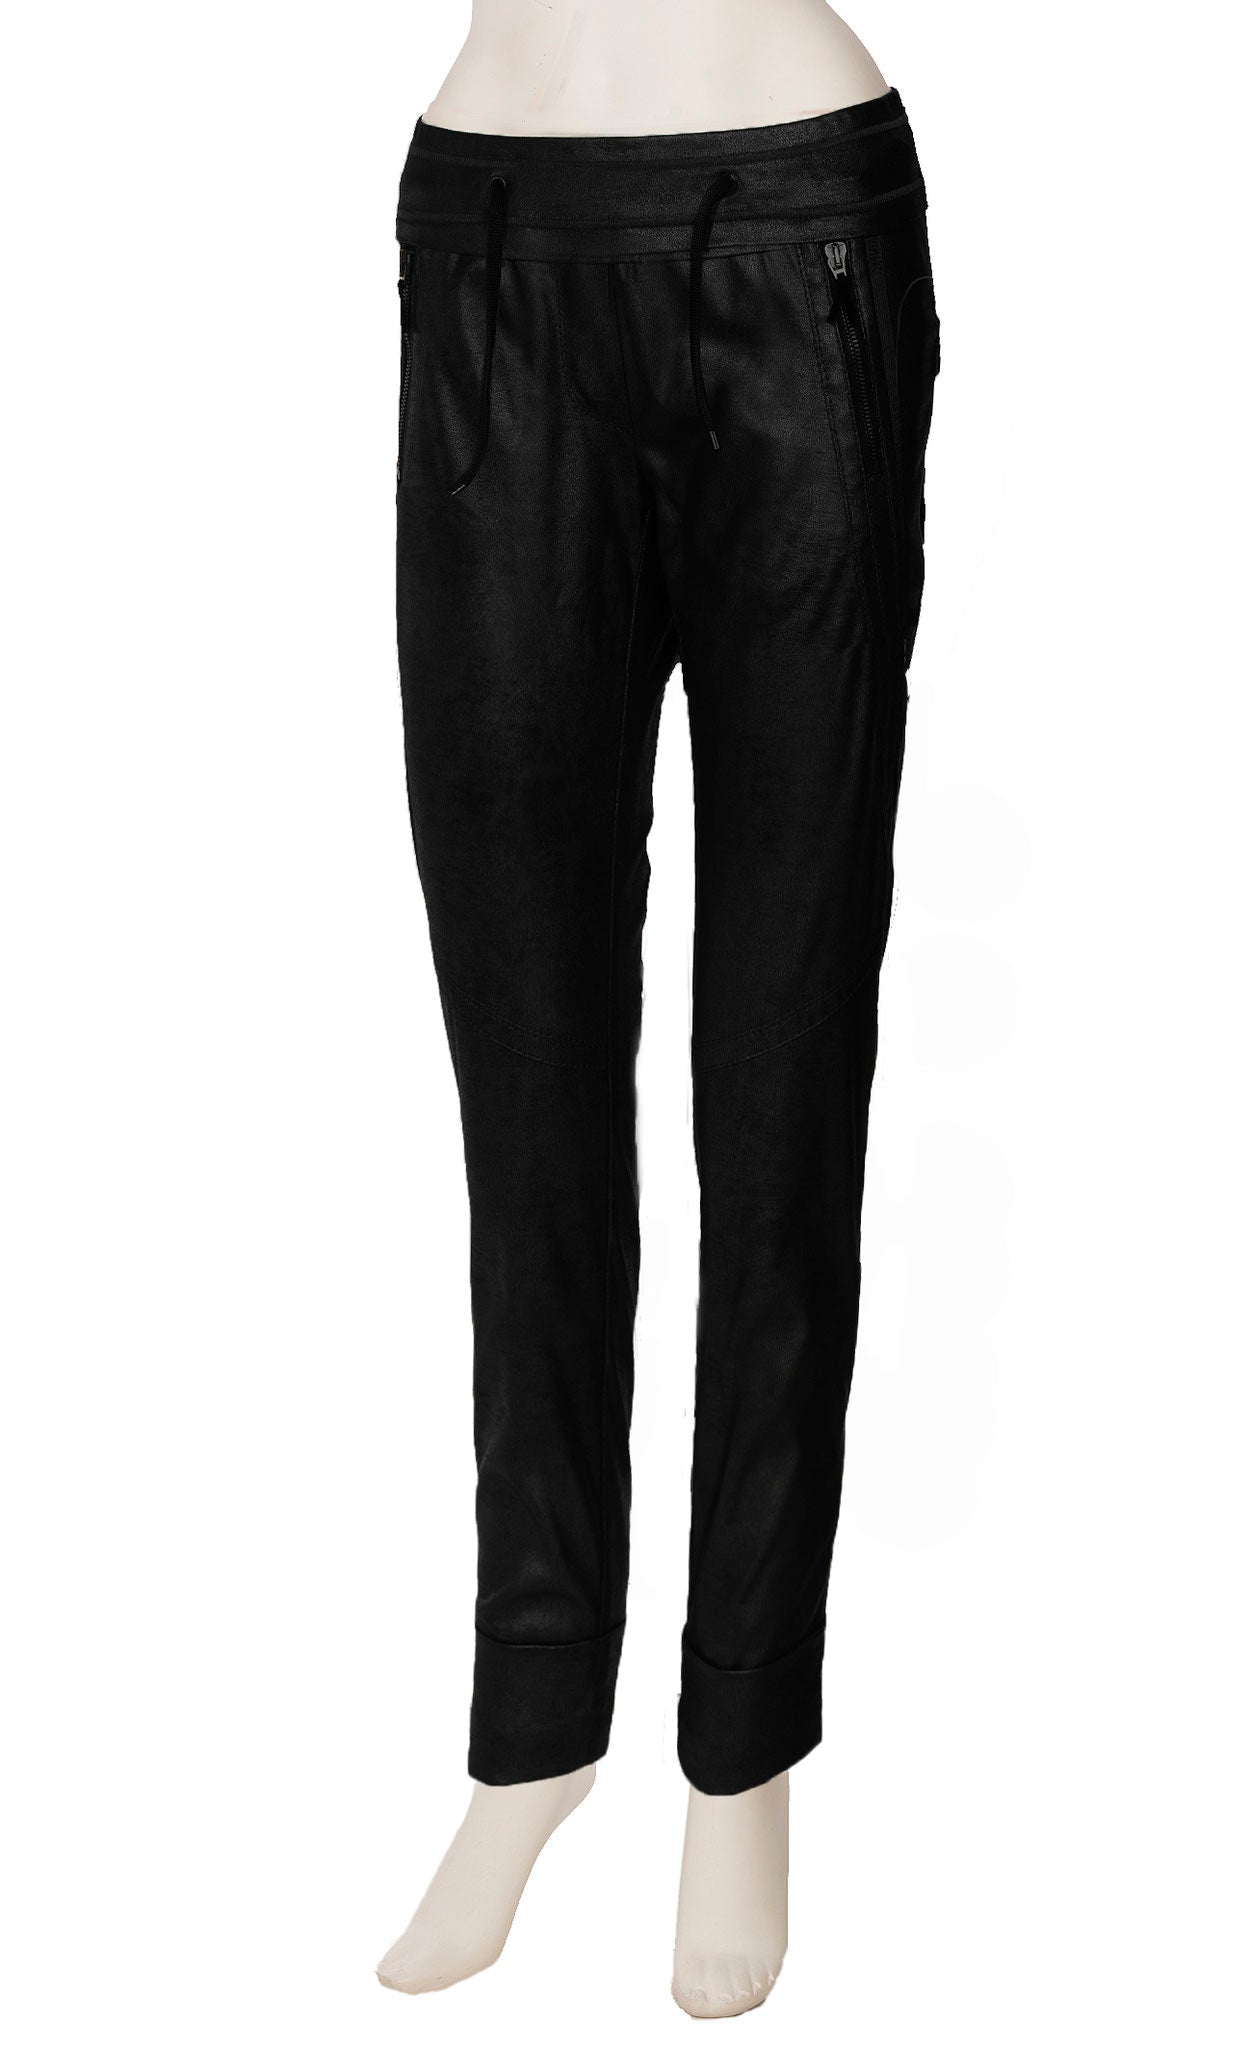 Front view of the beate heymann signature jogger. These joggers are black and appear faux leather. They have decorative stitching all over the leg and two front zip pockets.